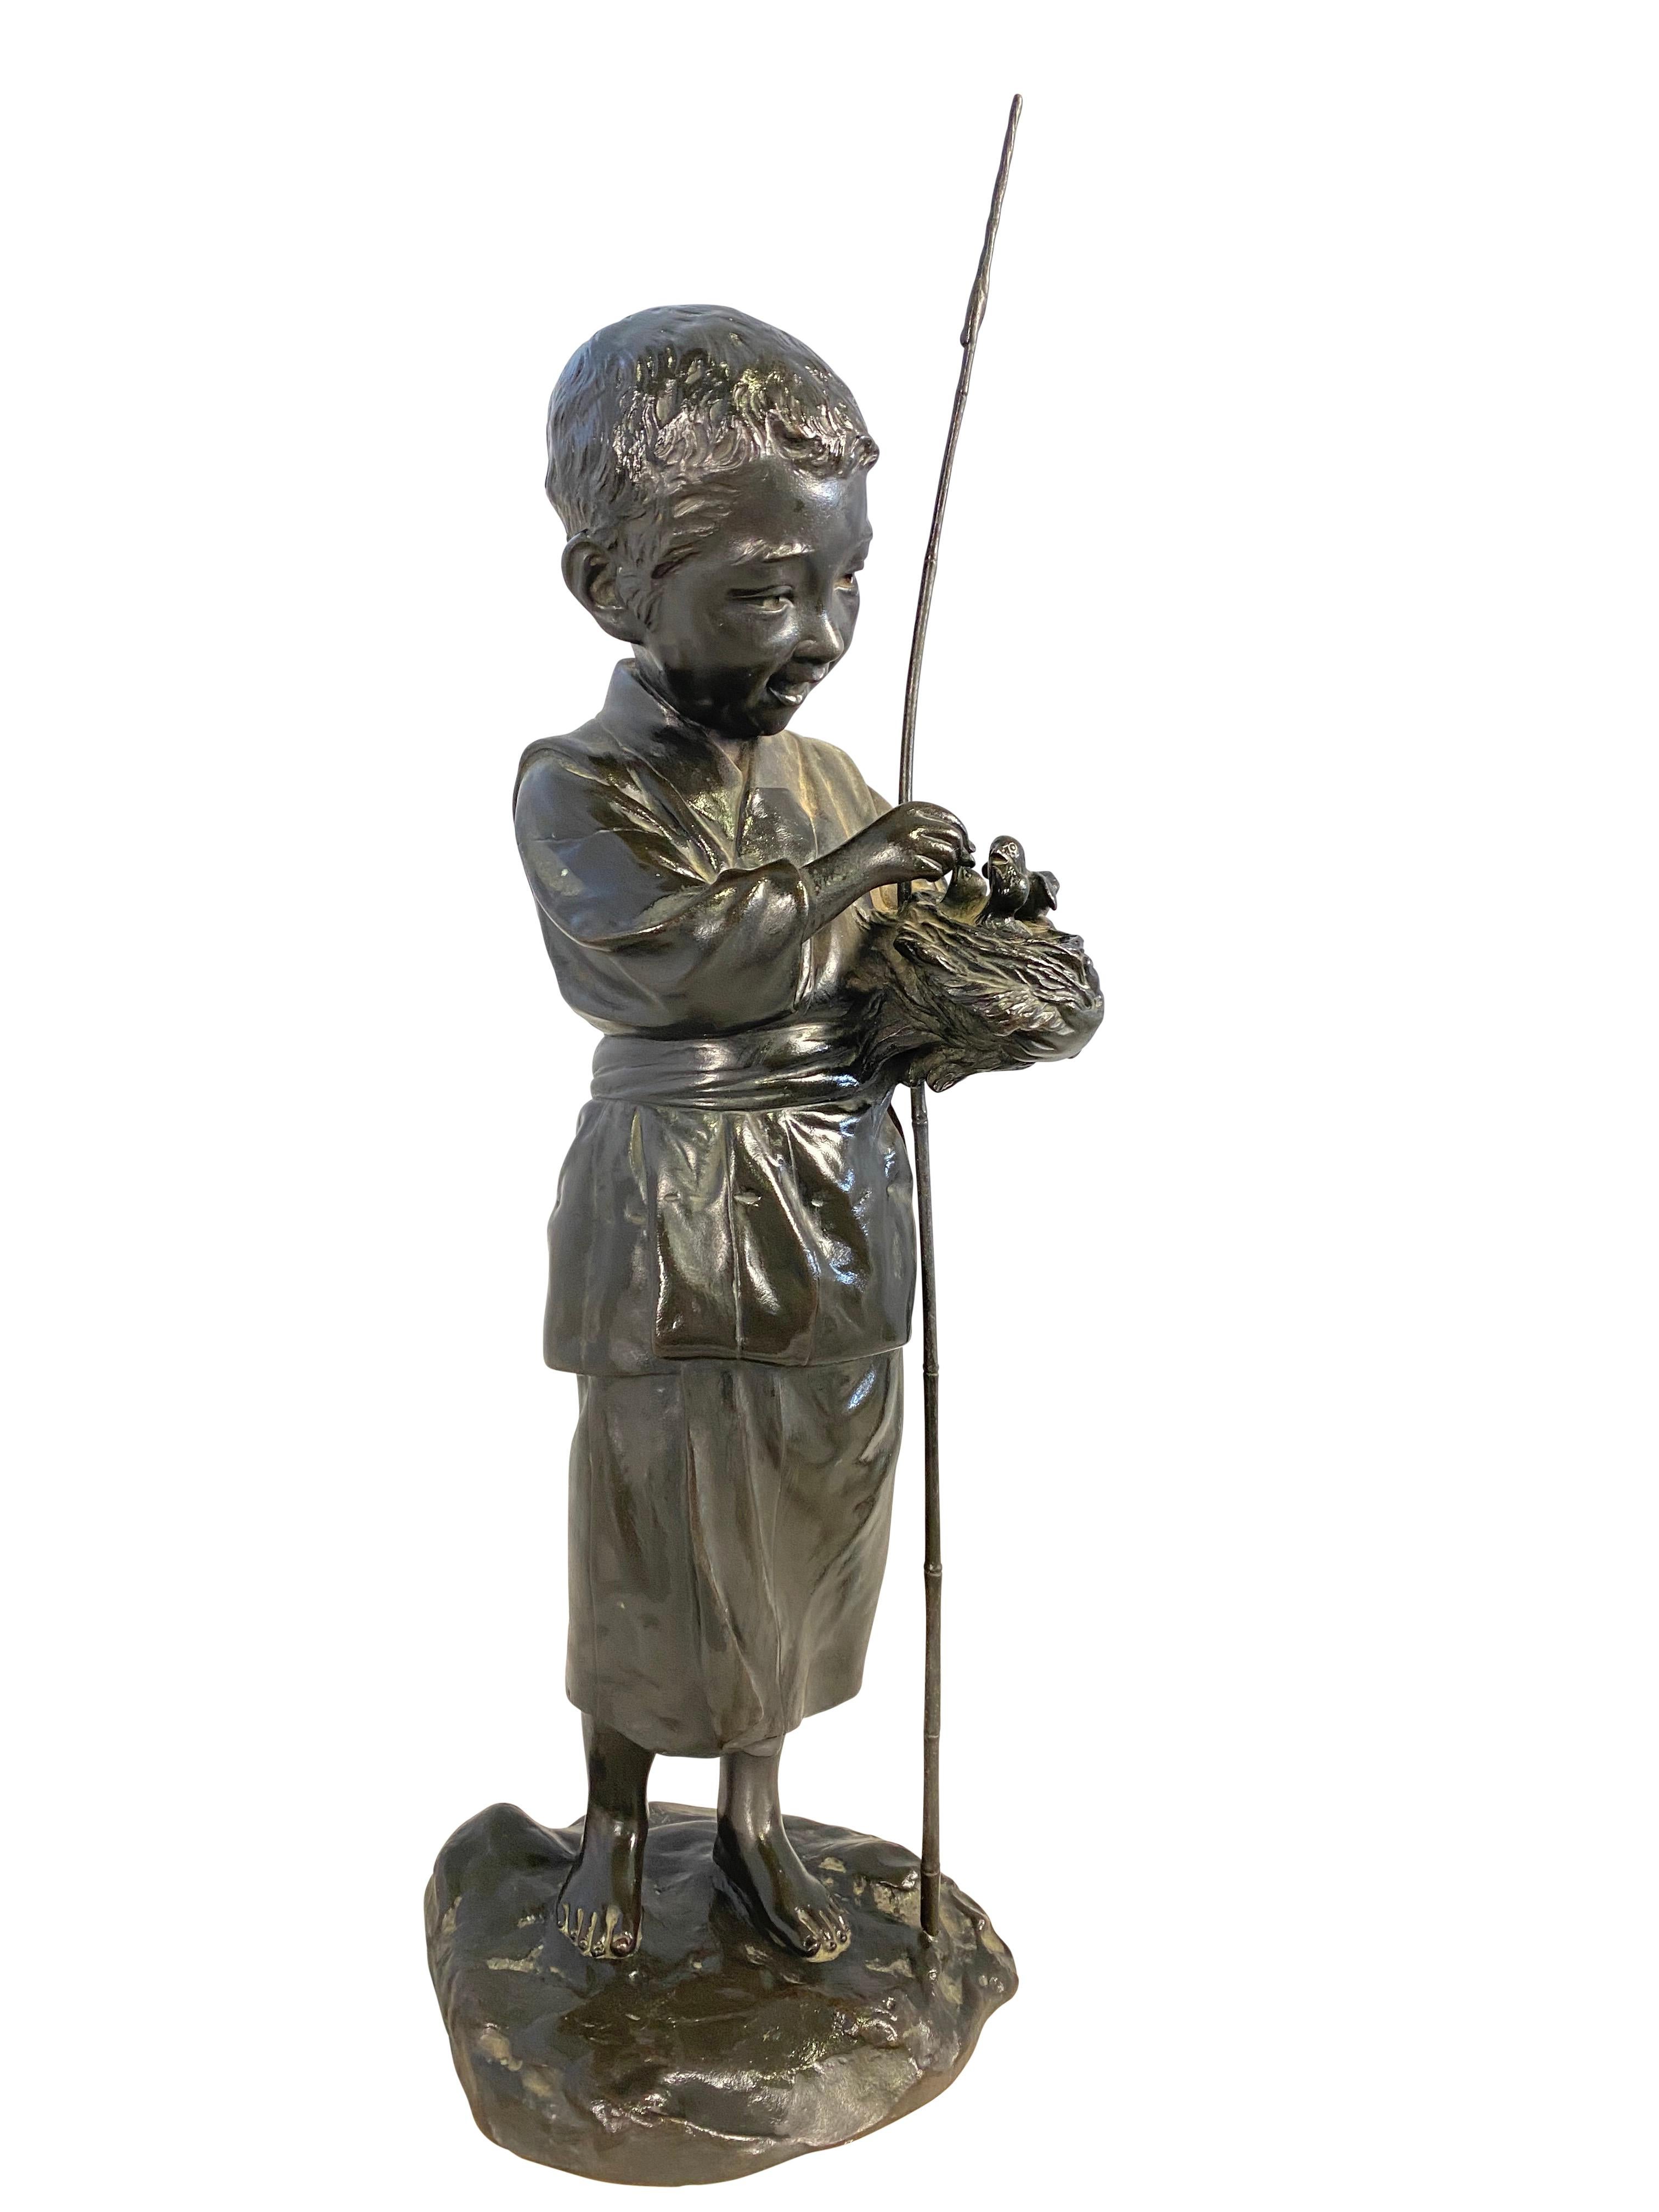 Bronze figure of a boy on a rounded base, holding a bird nest and stick. Eye-catching and timeless decoration for a relaxing ambience in the home and garden. A collector's item for antique and nostalgia for your home or garden.

Dimensions